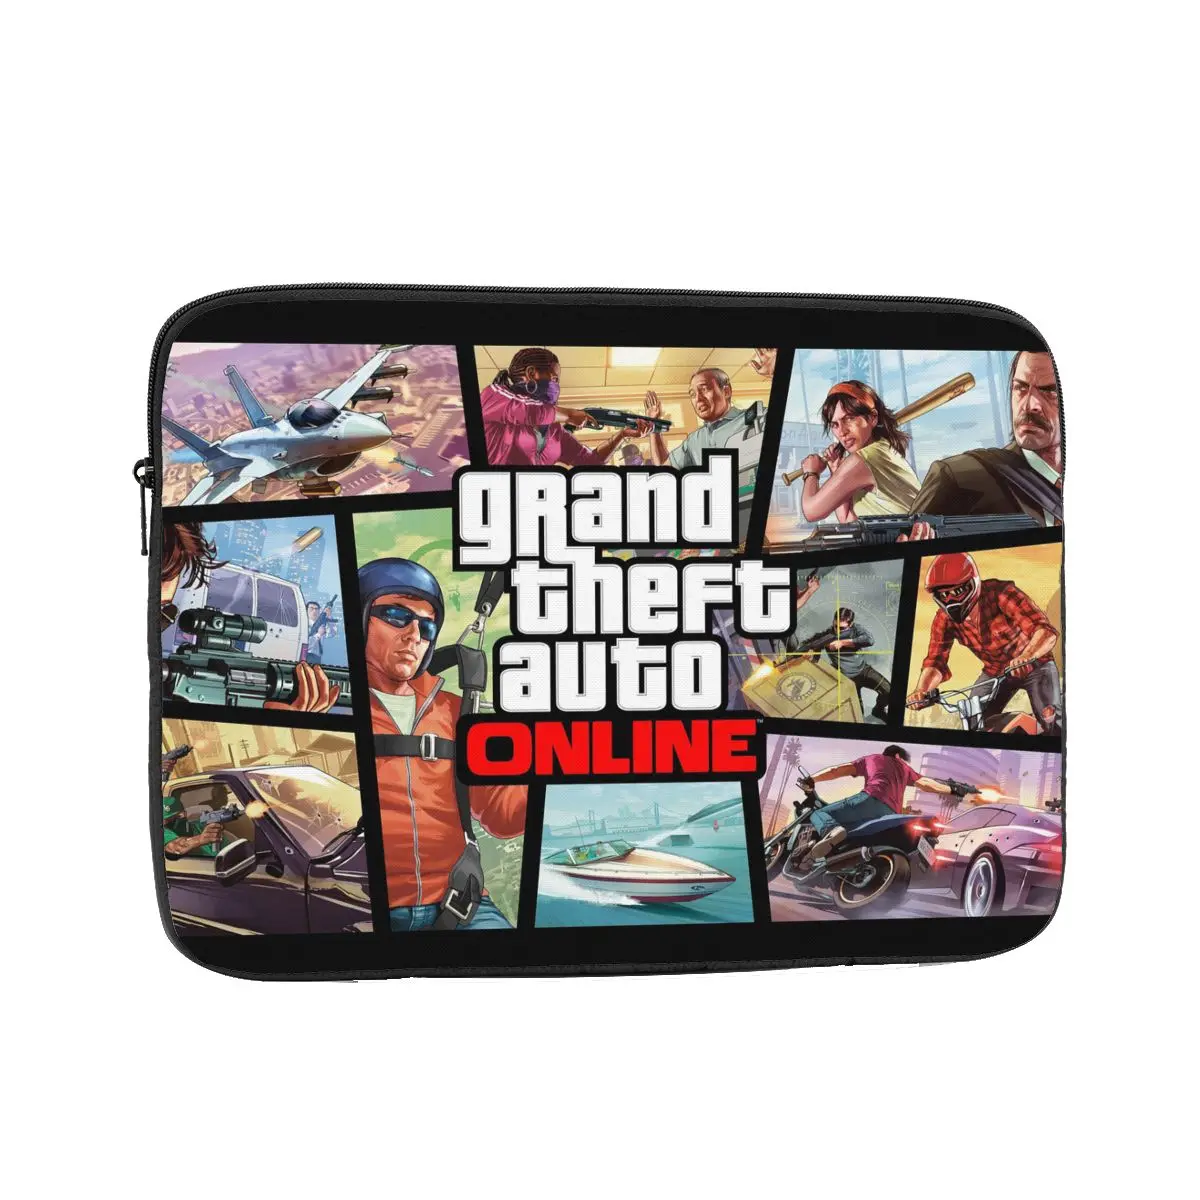 Grand Theft Auto Laptop Liner Sleeve 10 12 13 15 17 Inch for Macbook Air Pro Anime Plaid Notebook Bag Case Shockproof Case Bag